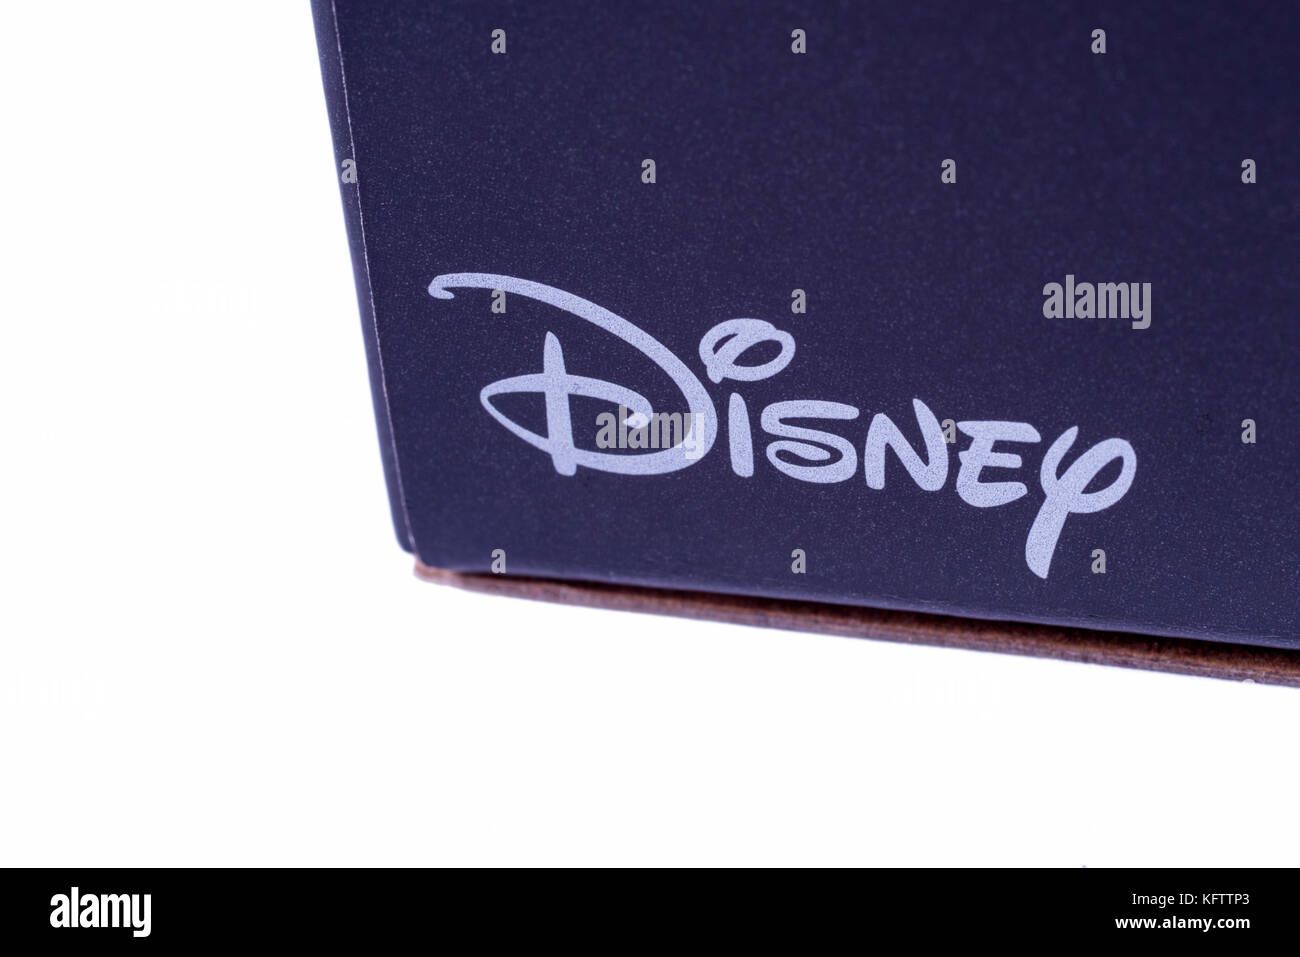 LONDON, UK - OCTOBER 10TH 2017: A close-up of the Disney logo on a product item, on 10th October 2017. Stock Photo